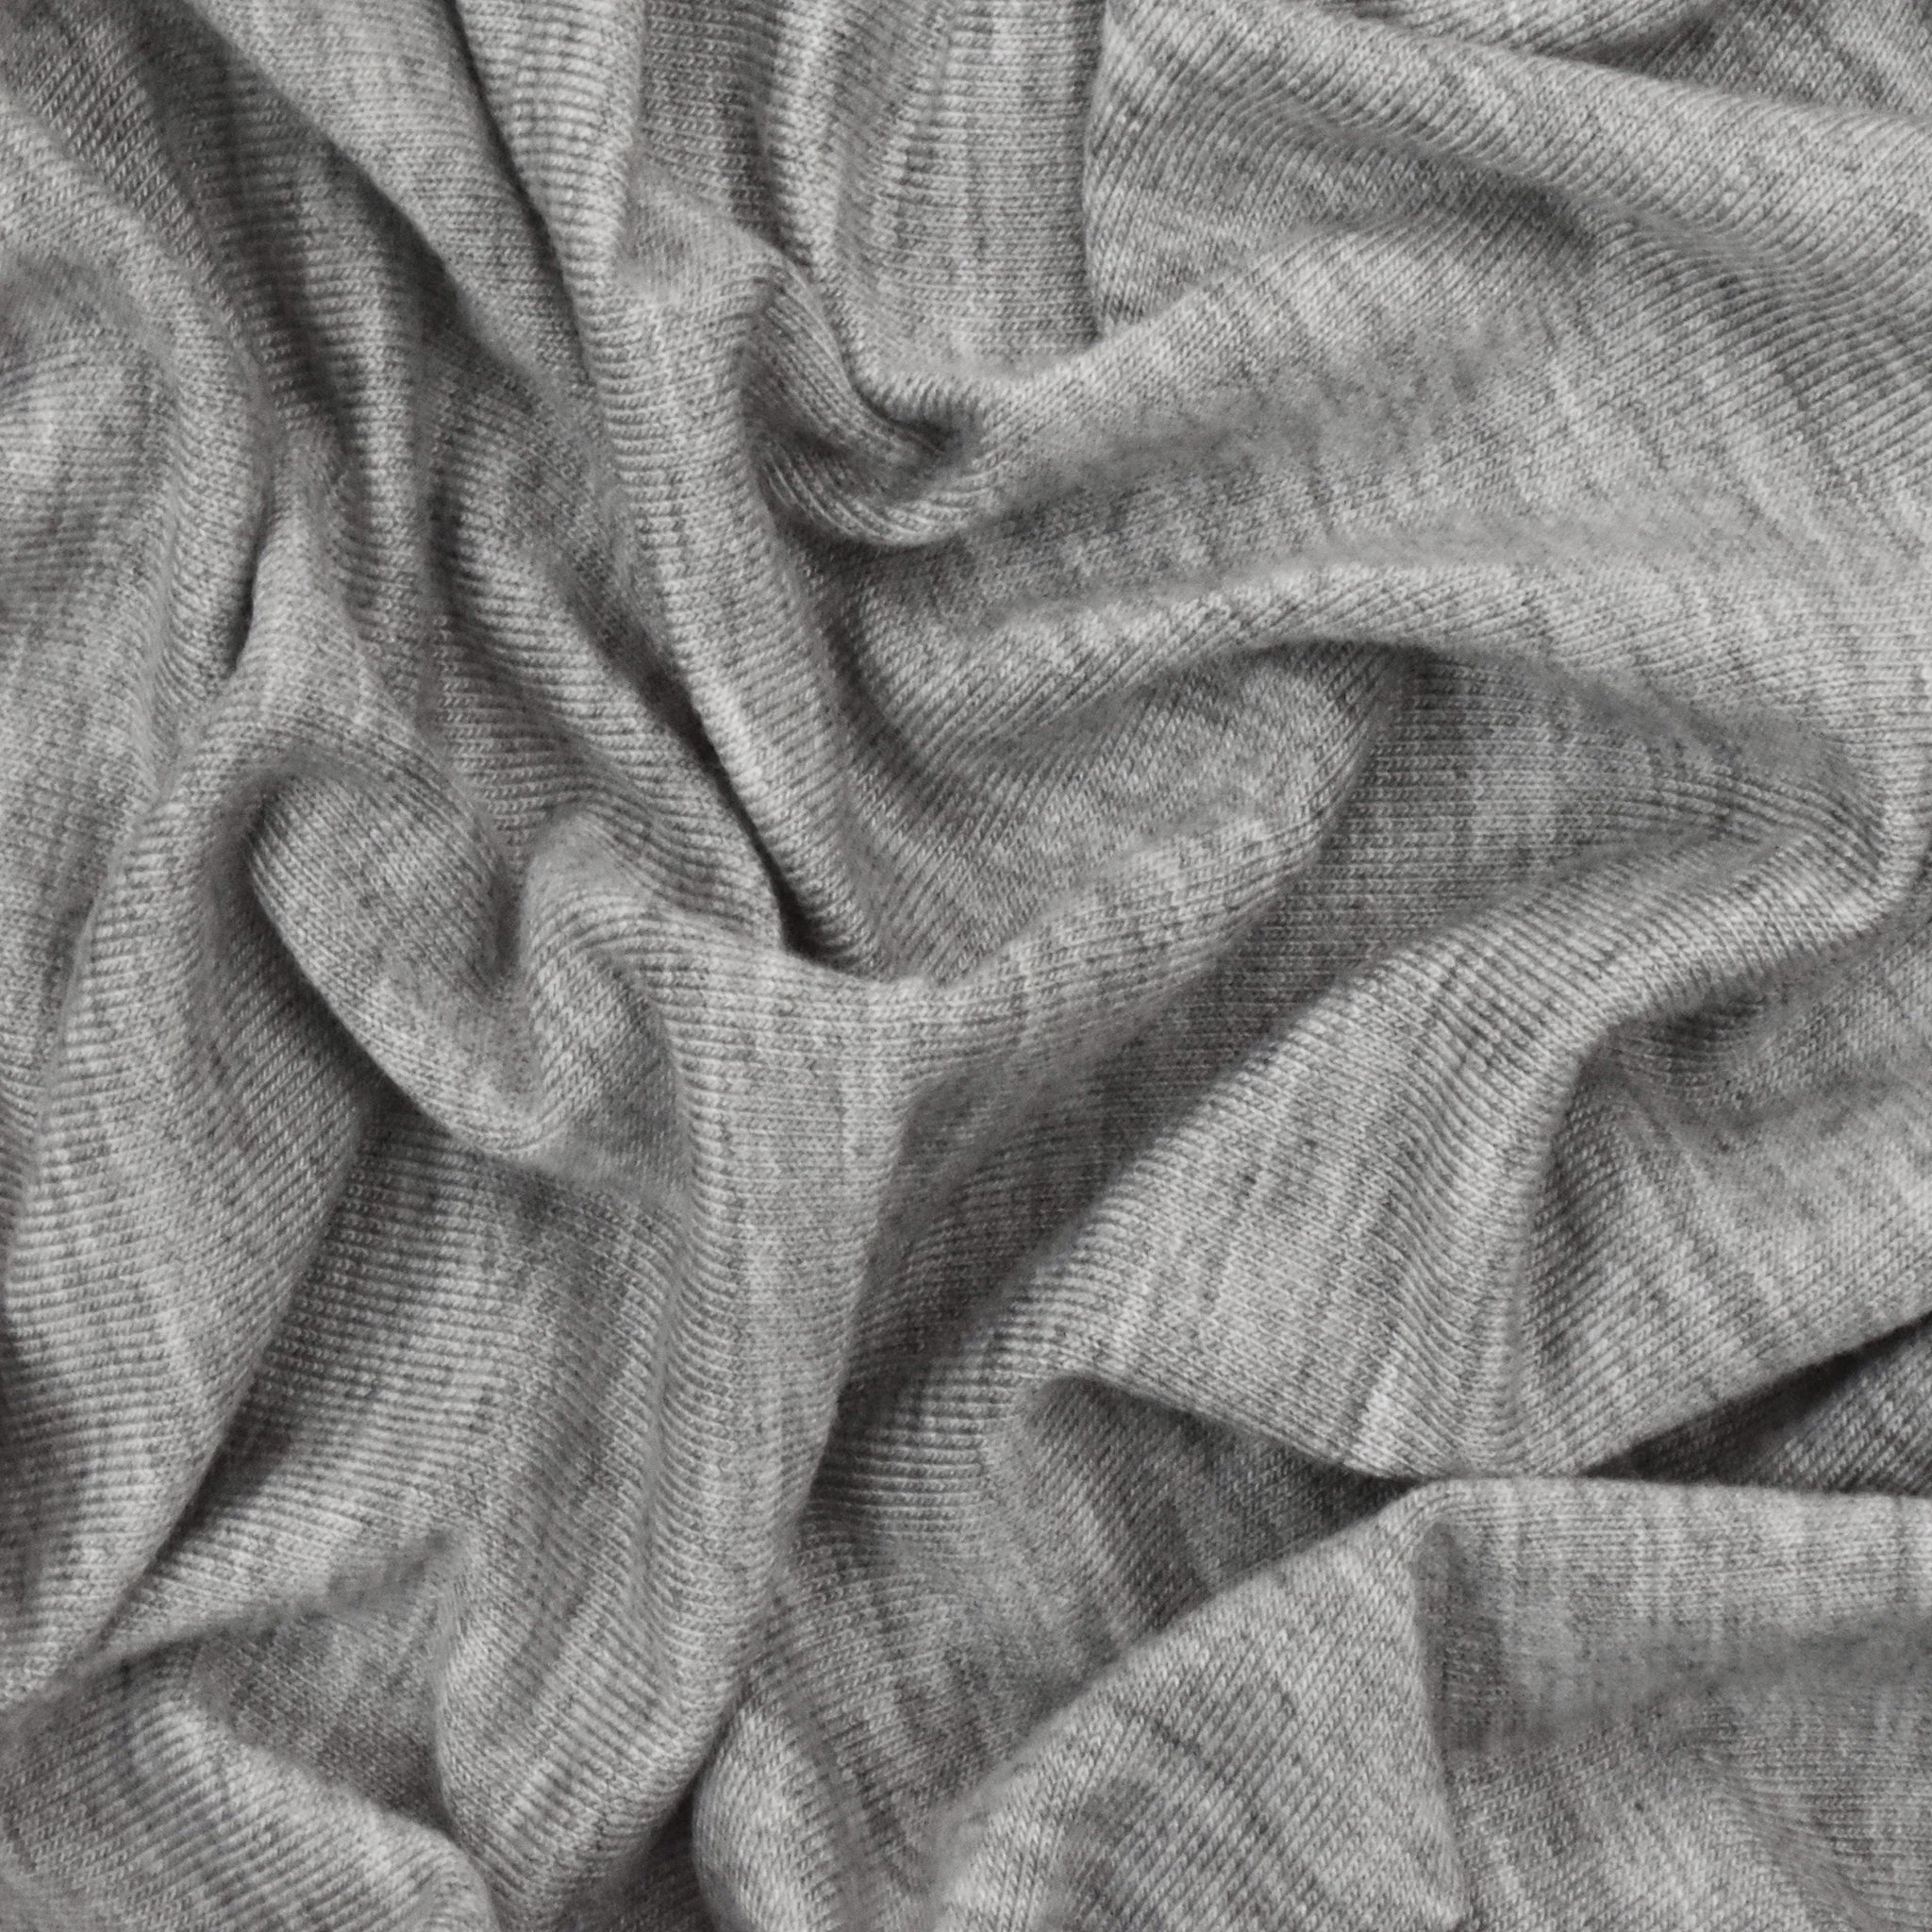 Wool Fabric Cashmere Fabric Dark Grey Fabric Upholstery Fabric Fabric The  Meter Fabric Apparel Fabric Fashion Fabric Clothing Craft Supplies